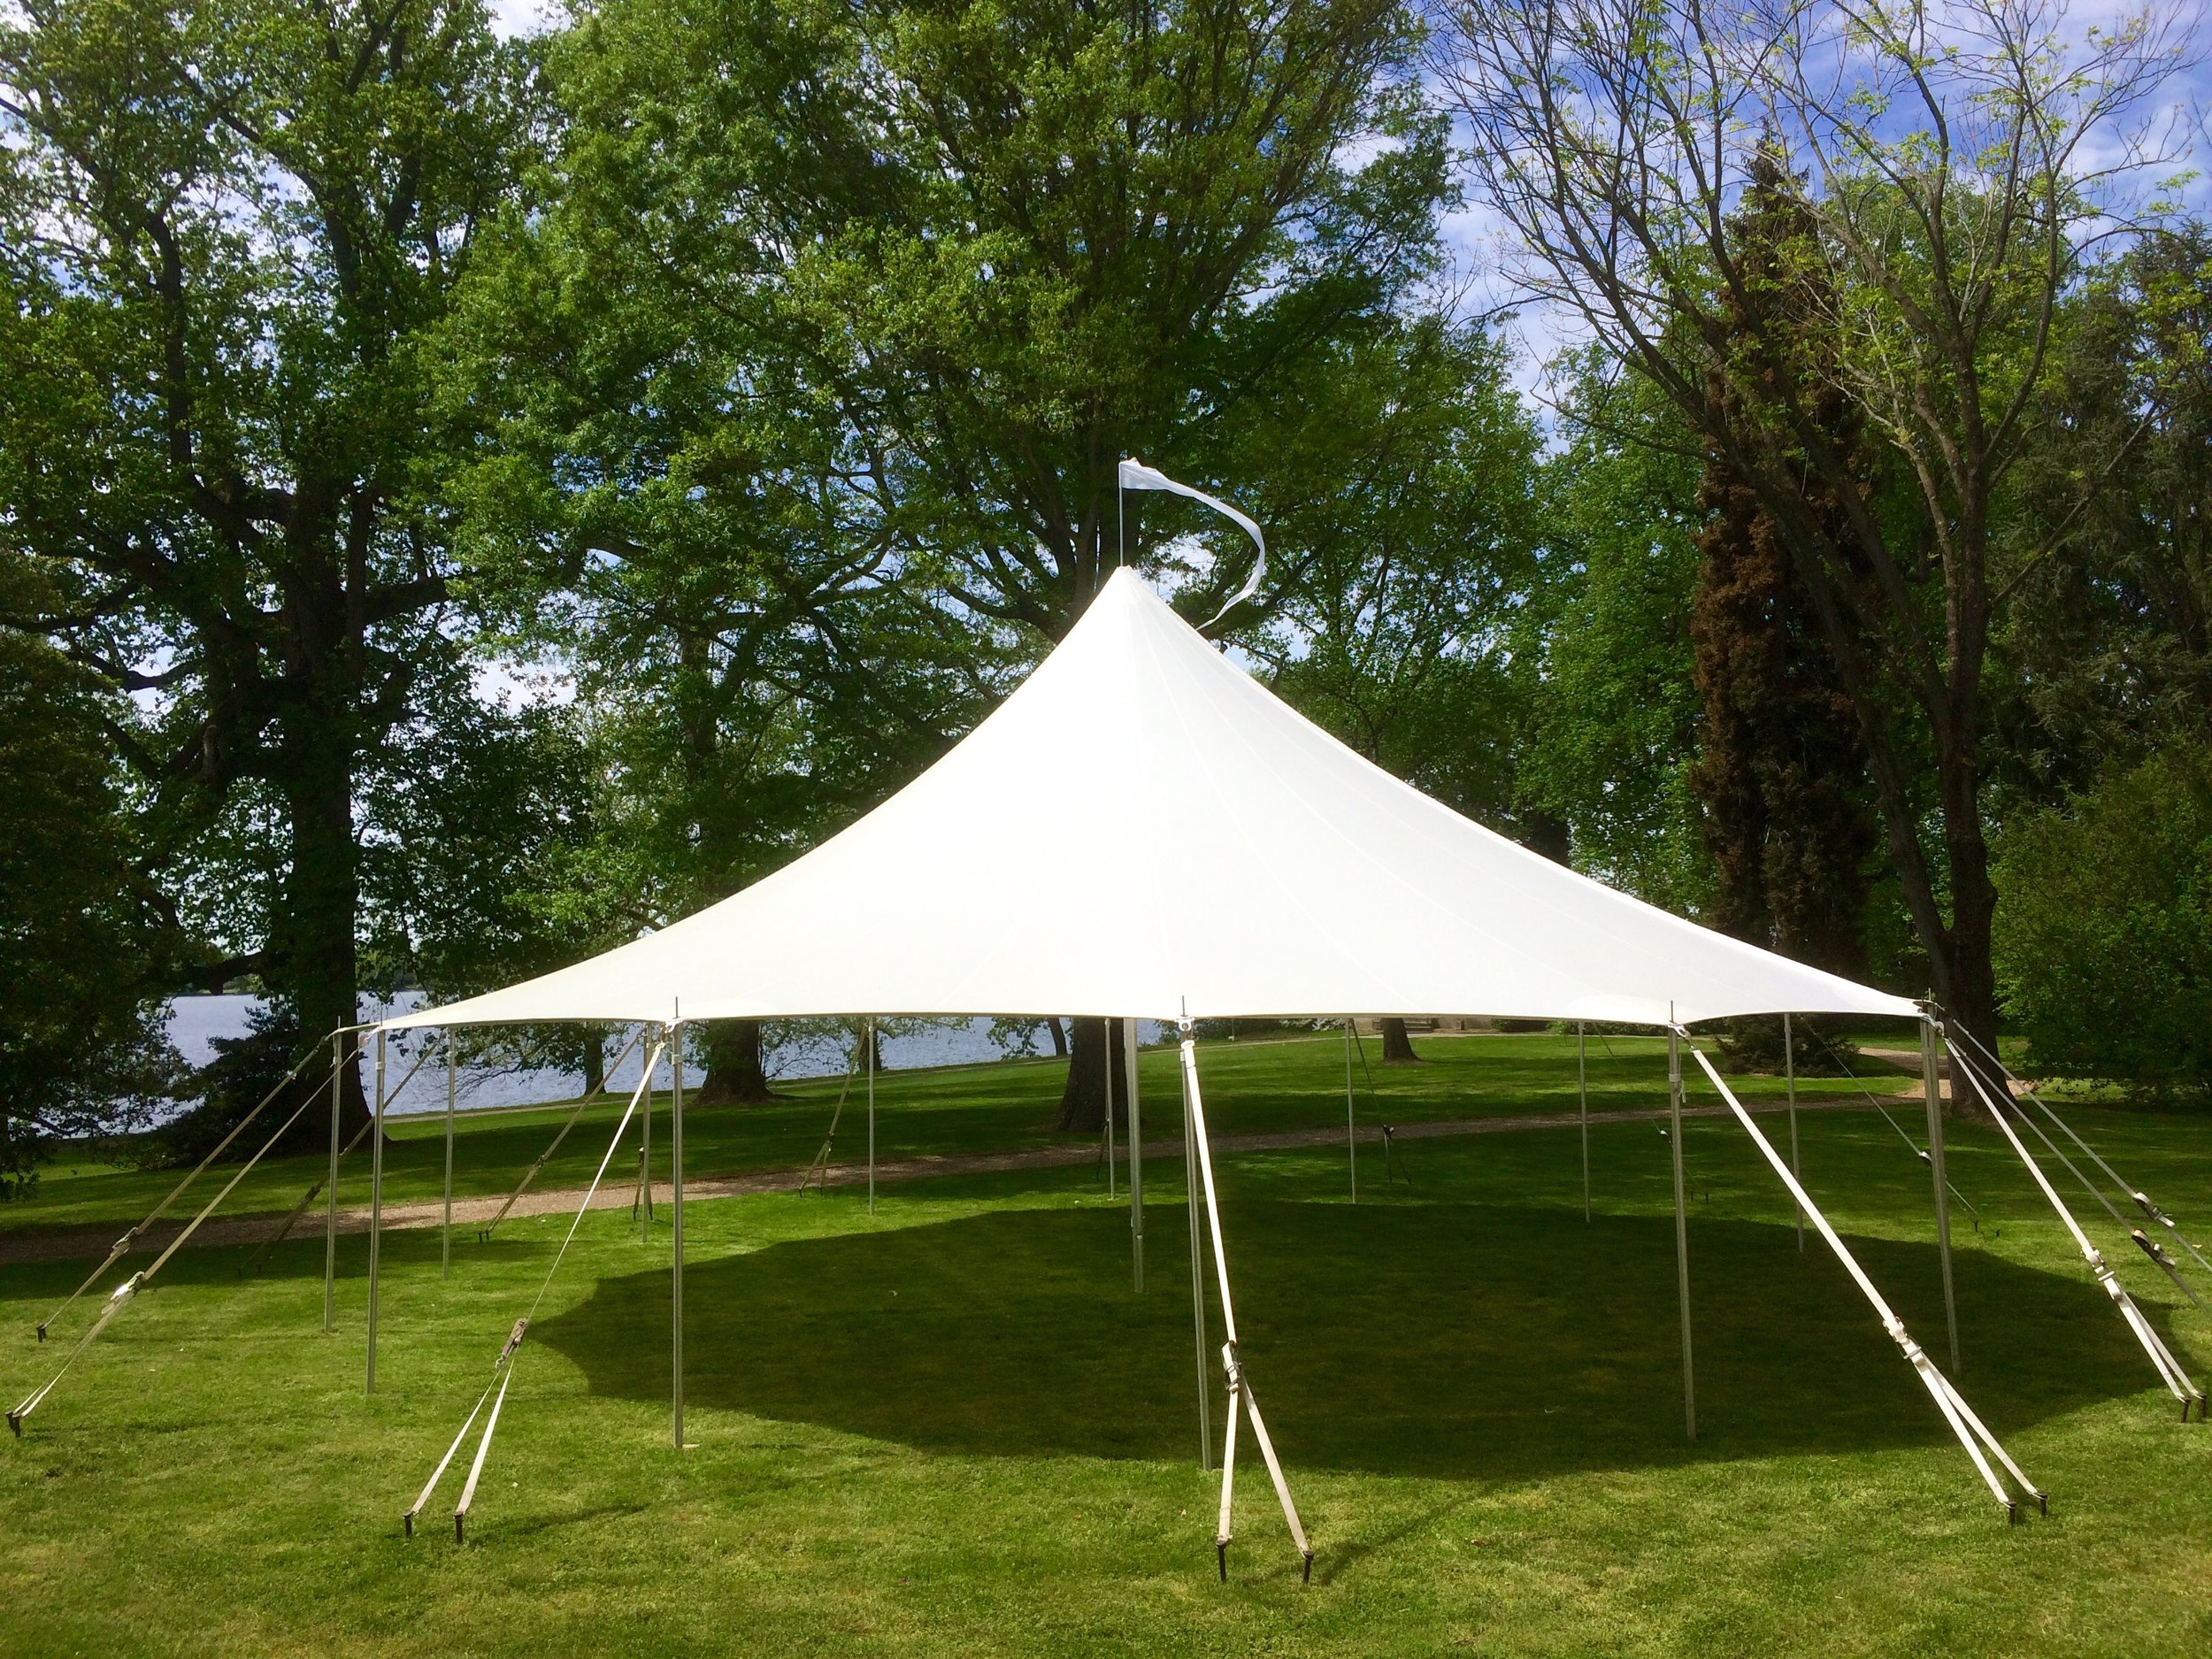 Beautiful sailcloth tent for rent in Towson, MD